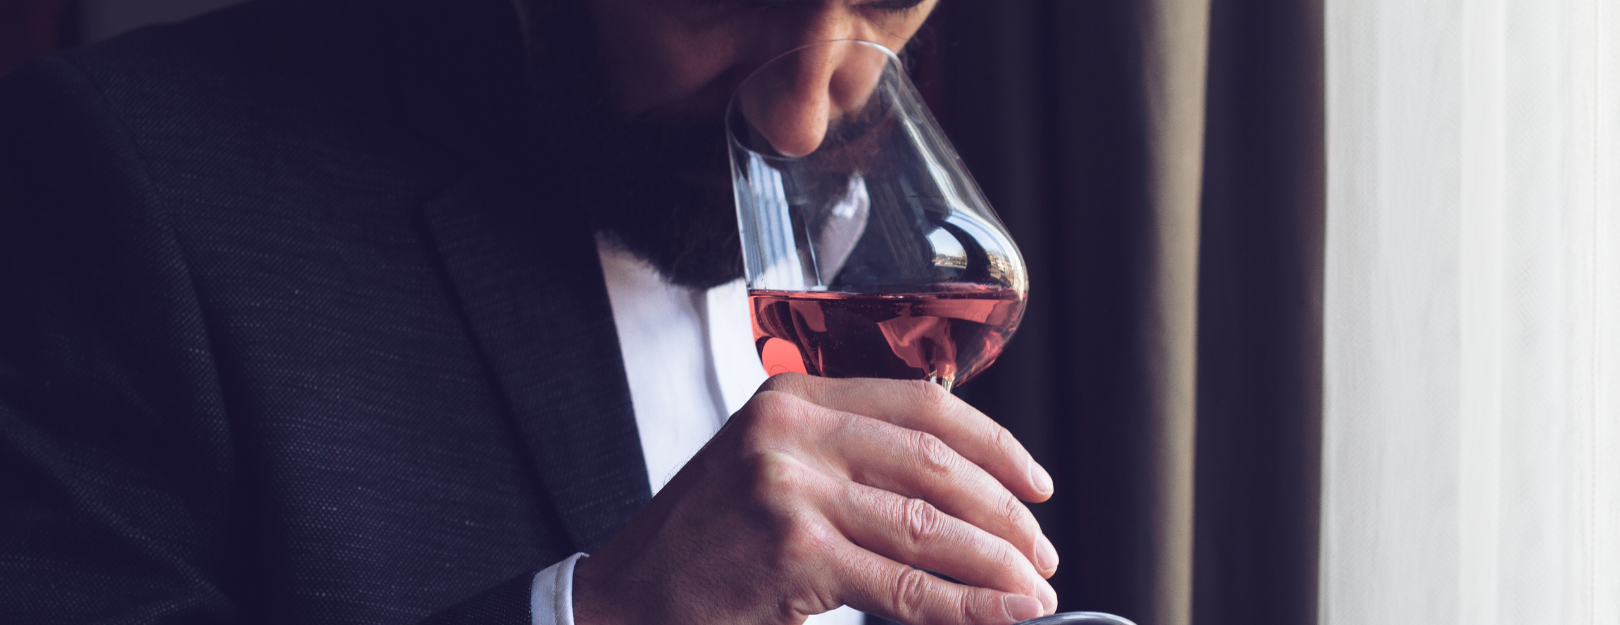 how to smell wine during a wine tasting 